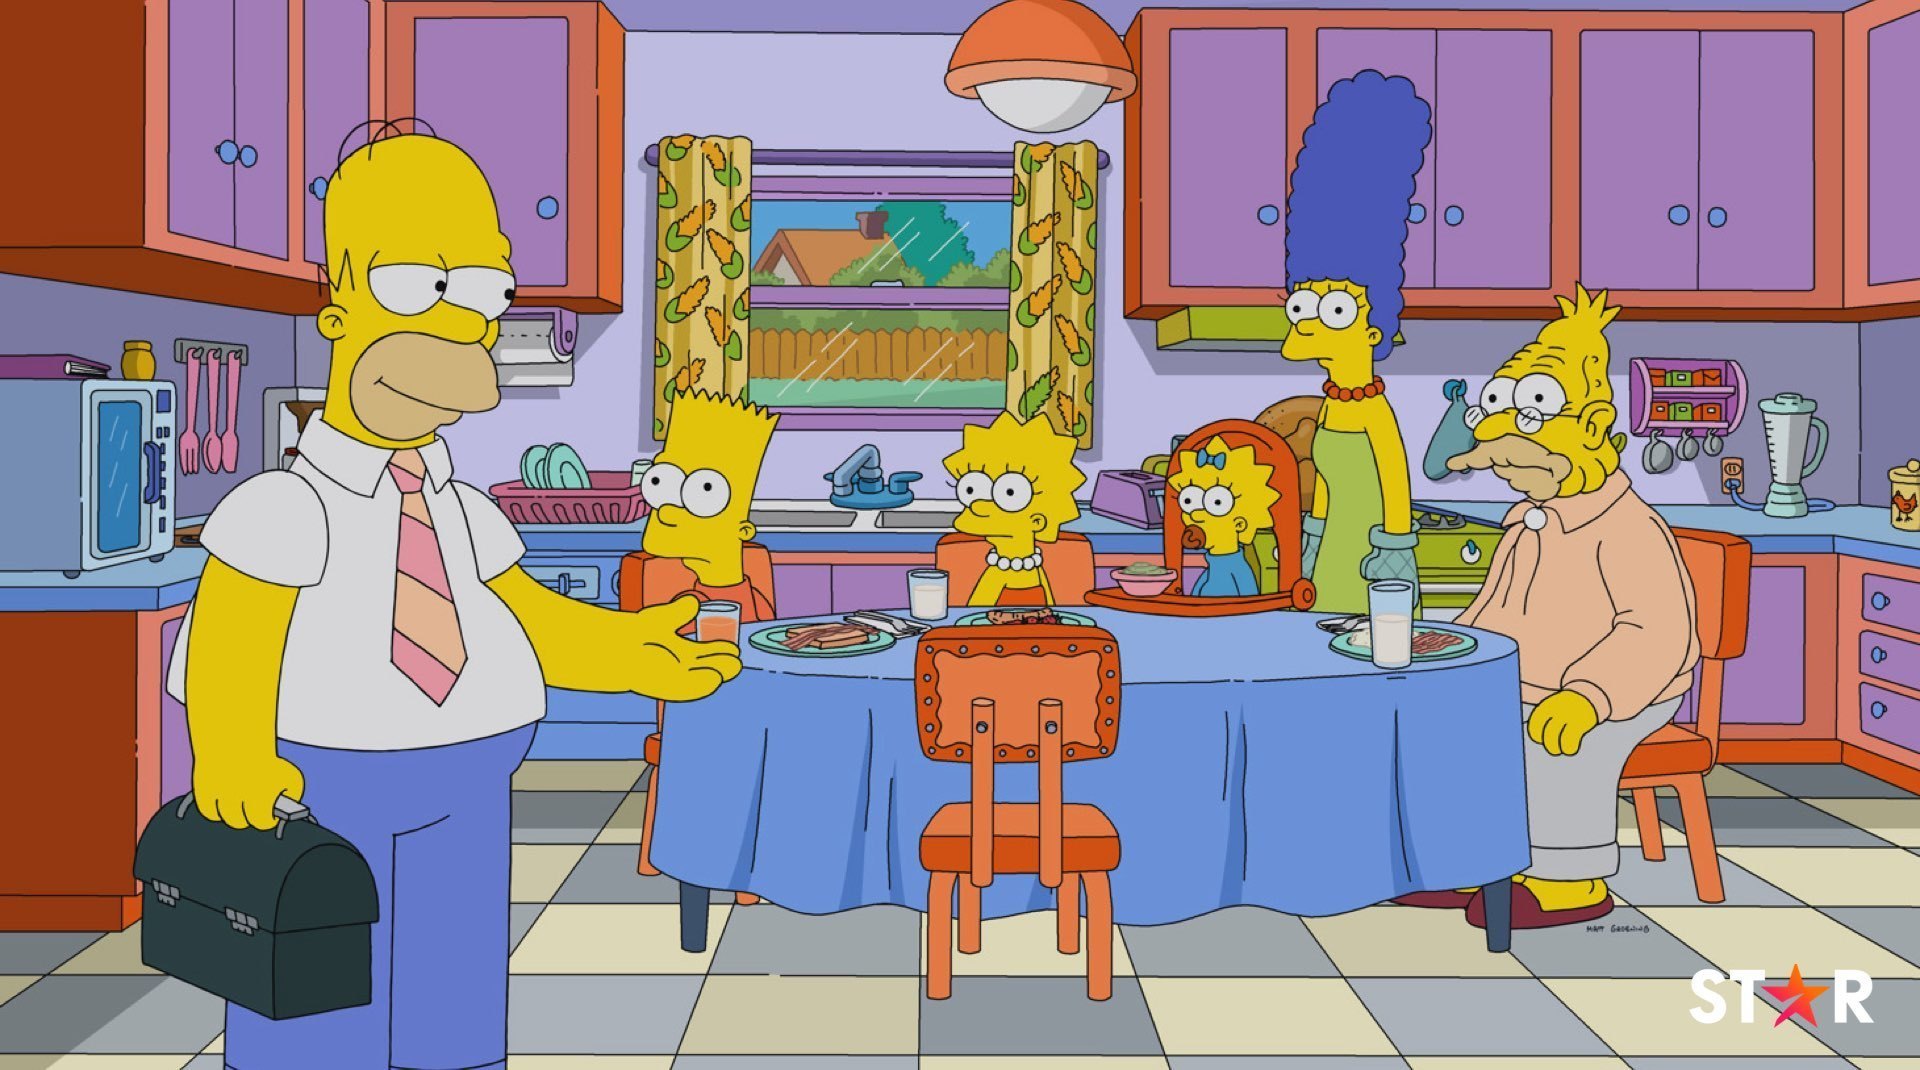 A still image from The Simpsons Season 32